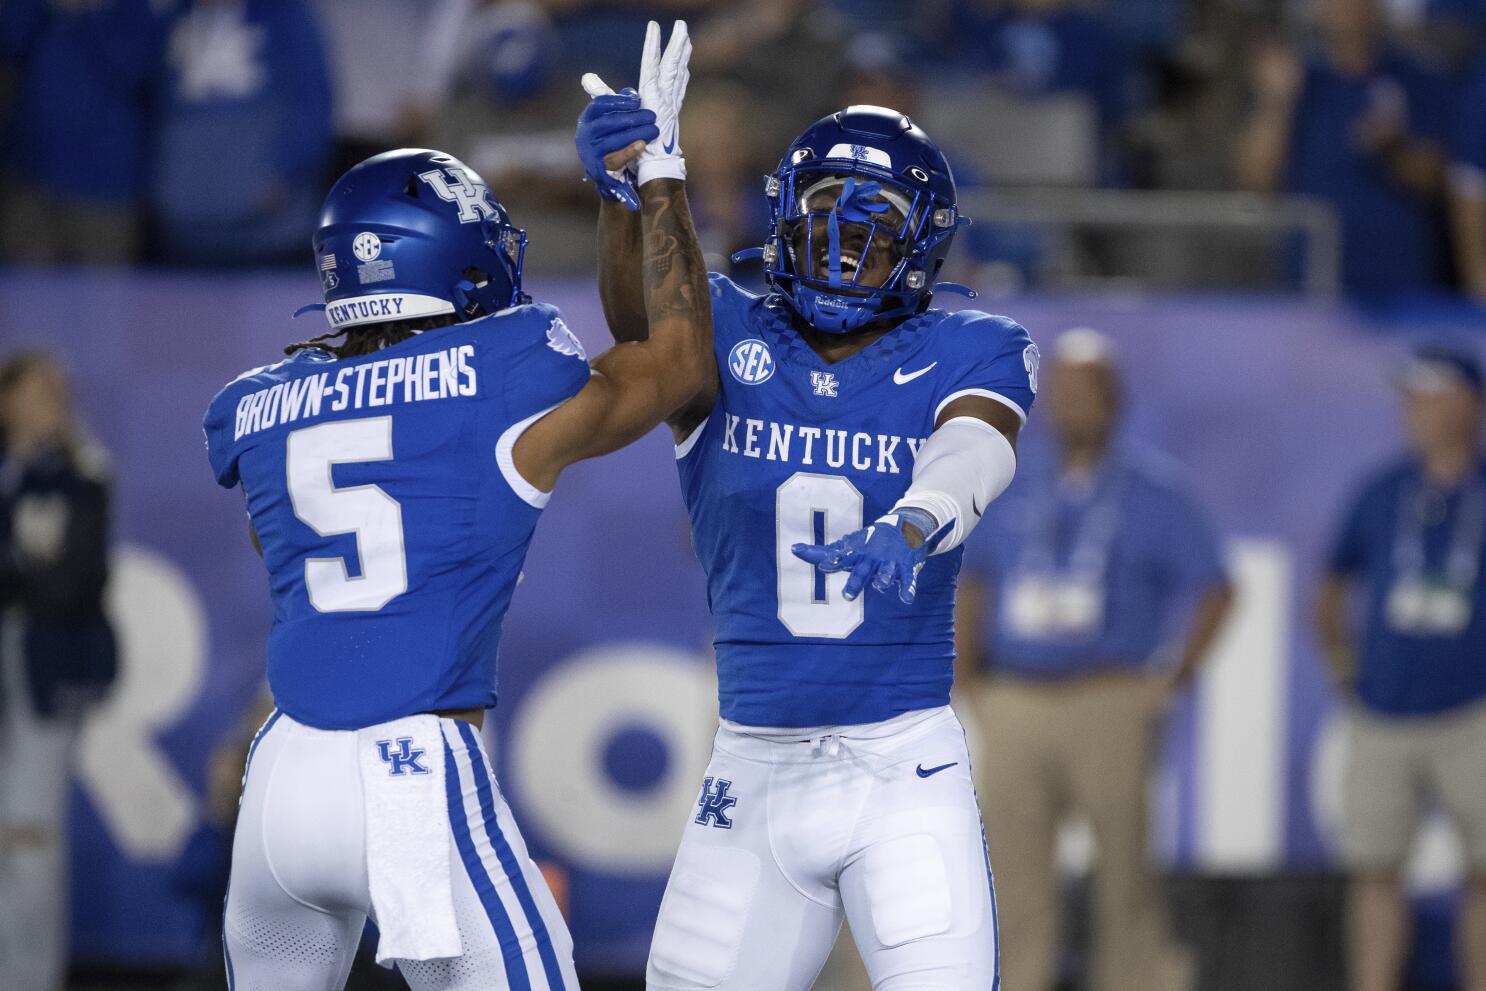 The Kentucky Wildcats visit skidding Vanderbilt looking to stay undefeated  - The San Diego Union-Tribune